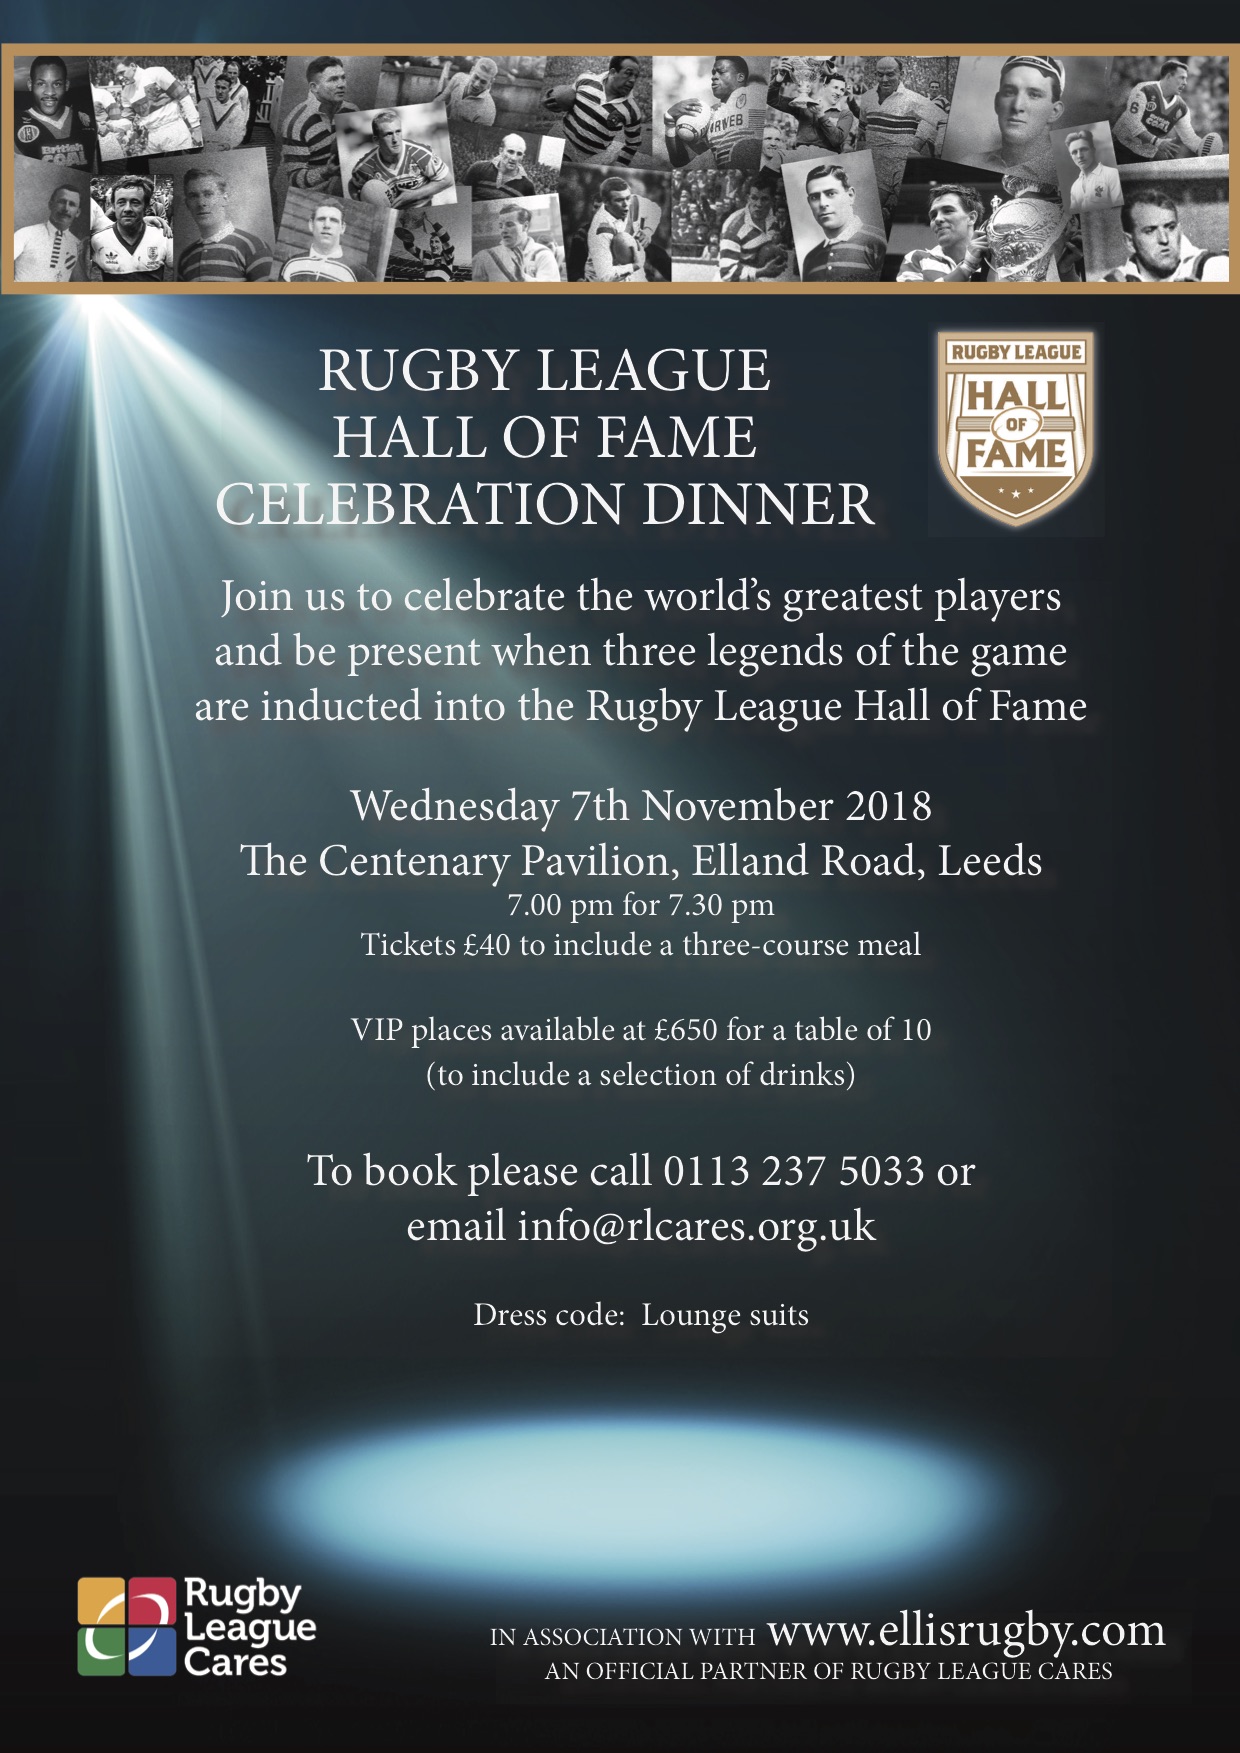 Tickets now on sale for historic Rugby League Hall of Fame dinner